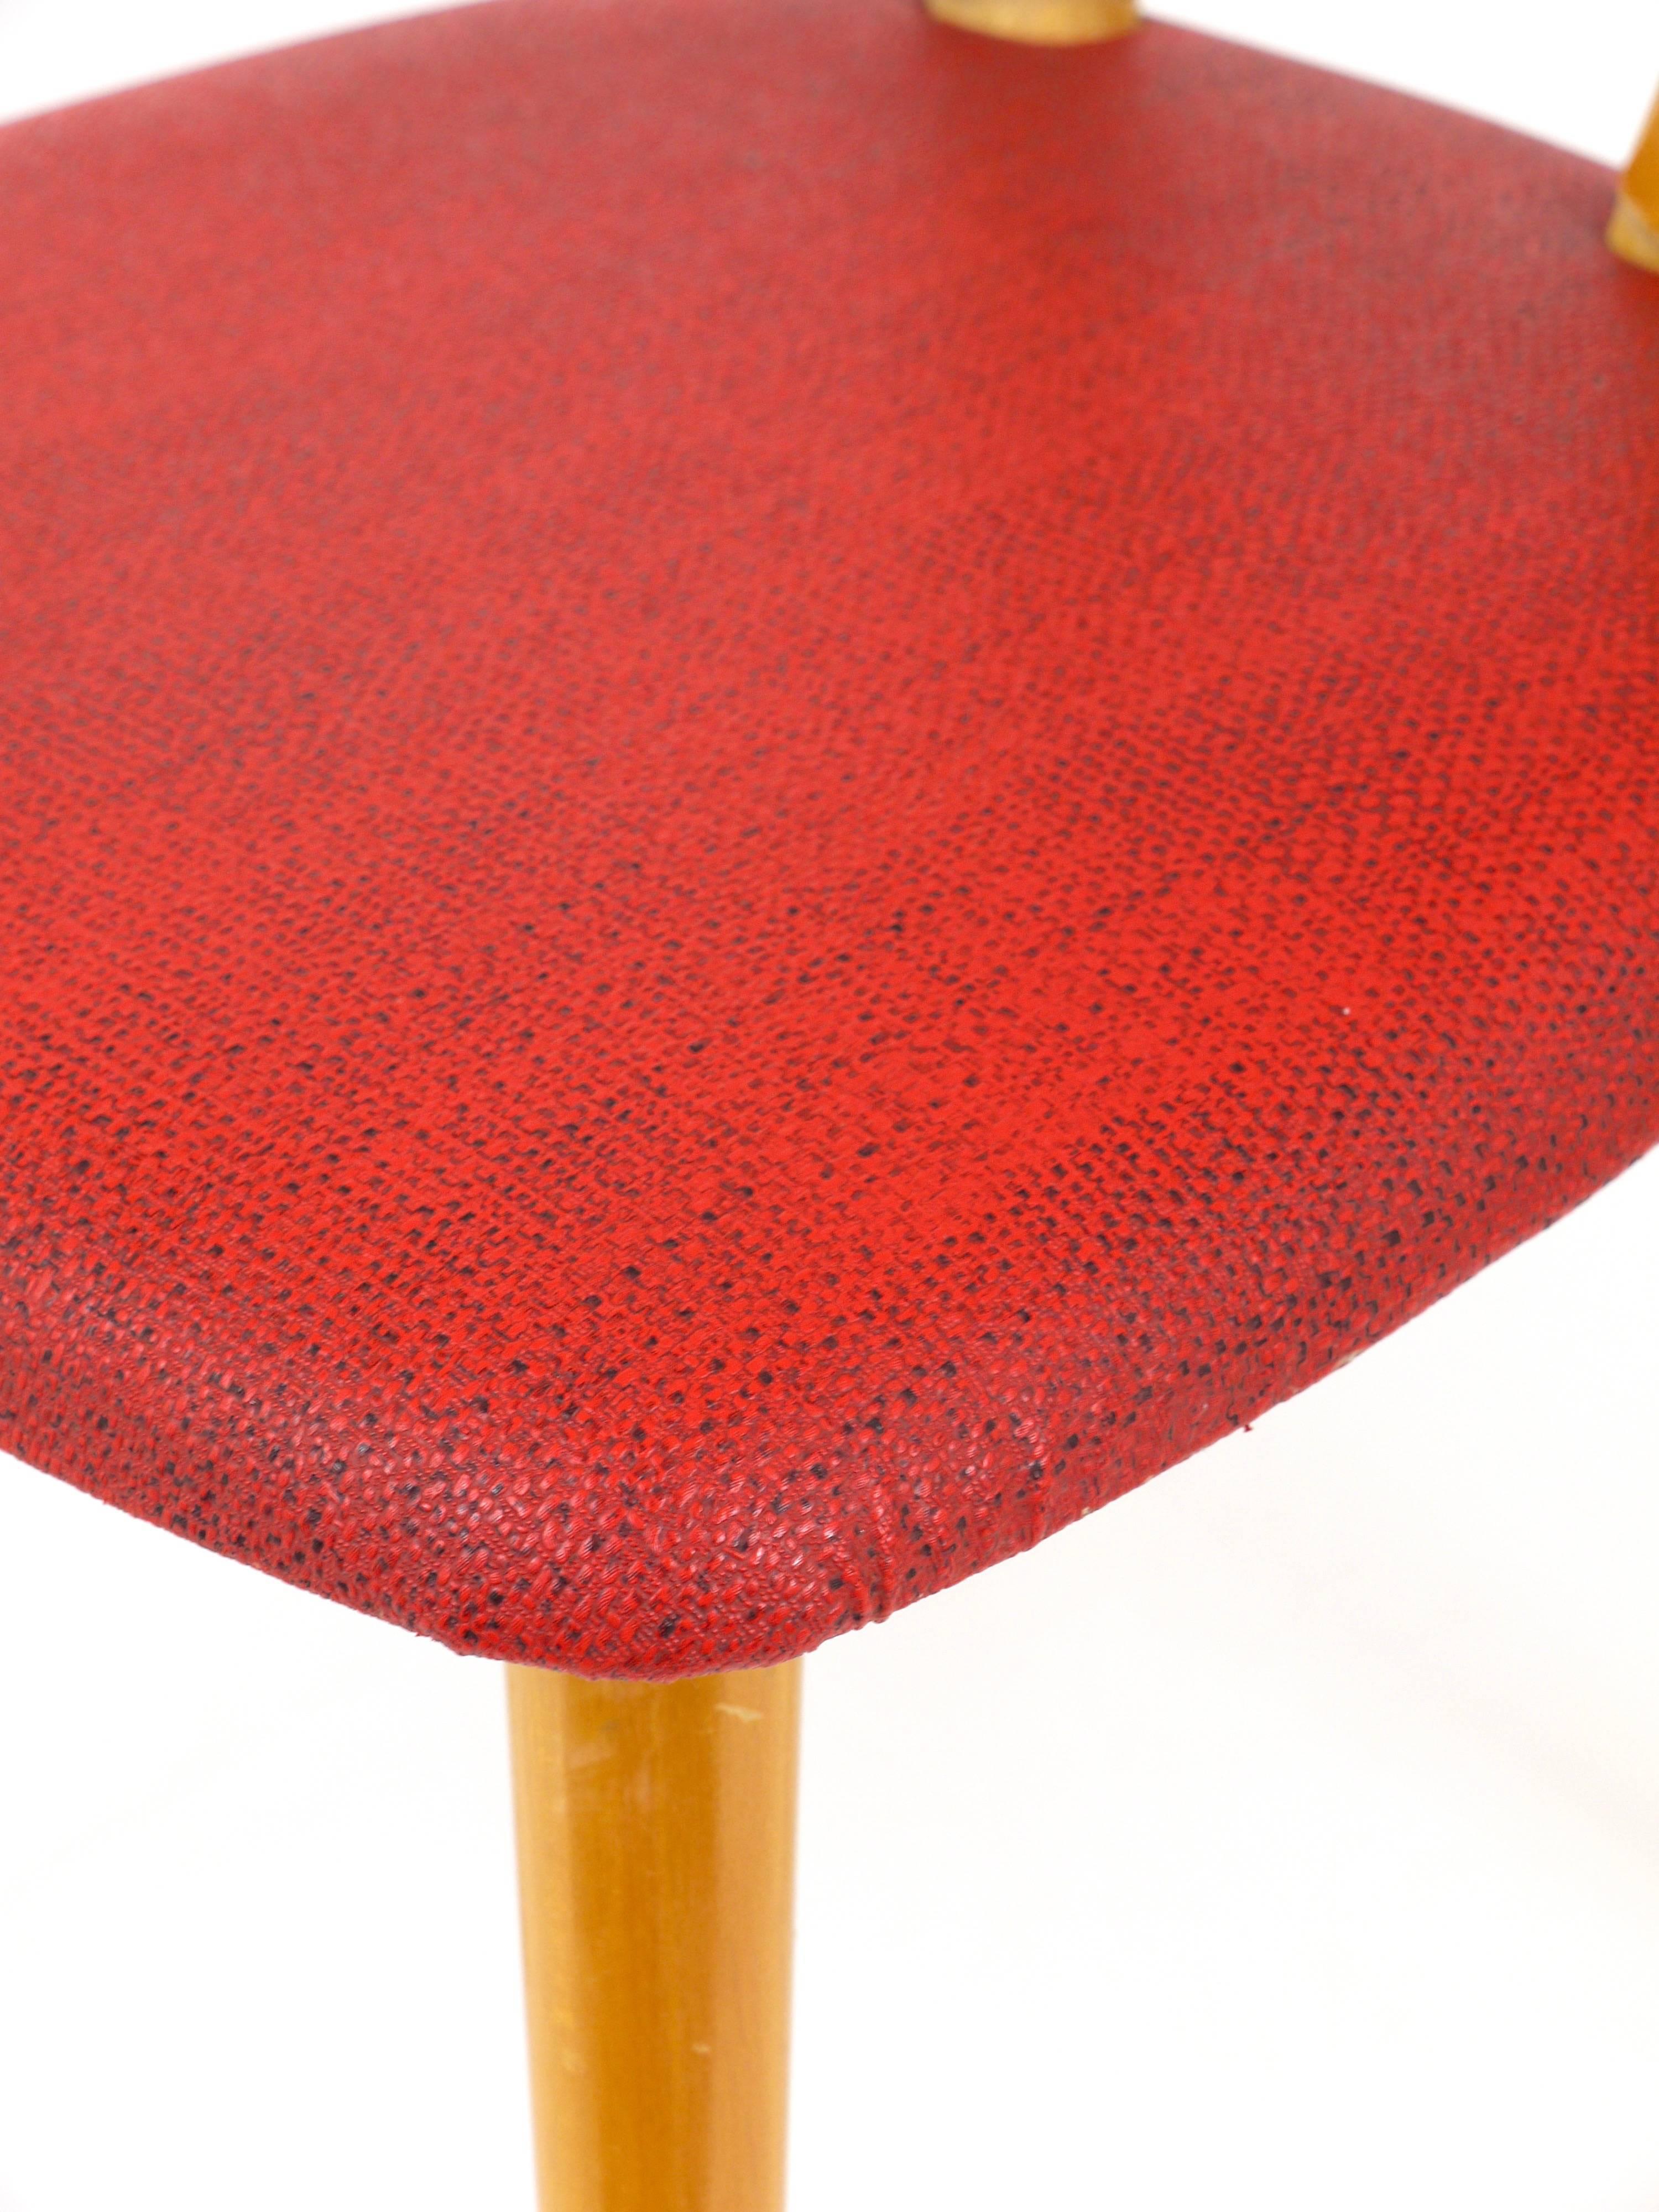 Red Heart Mid Century Modern Chair for Children,  Austria, 1950s For Sale 1